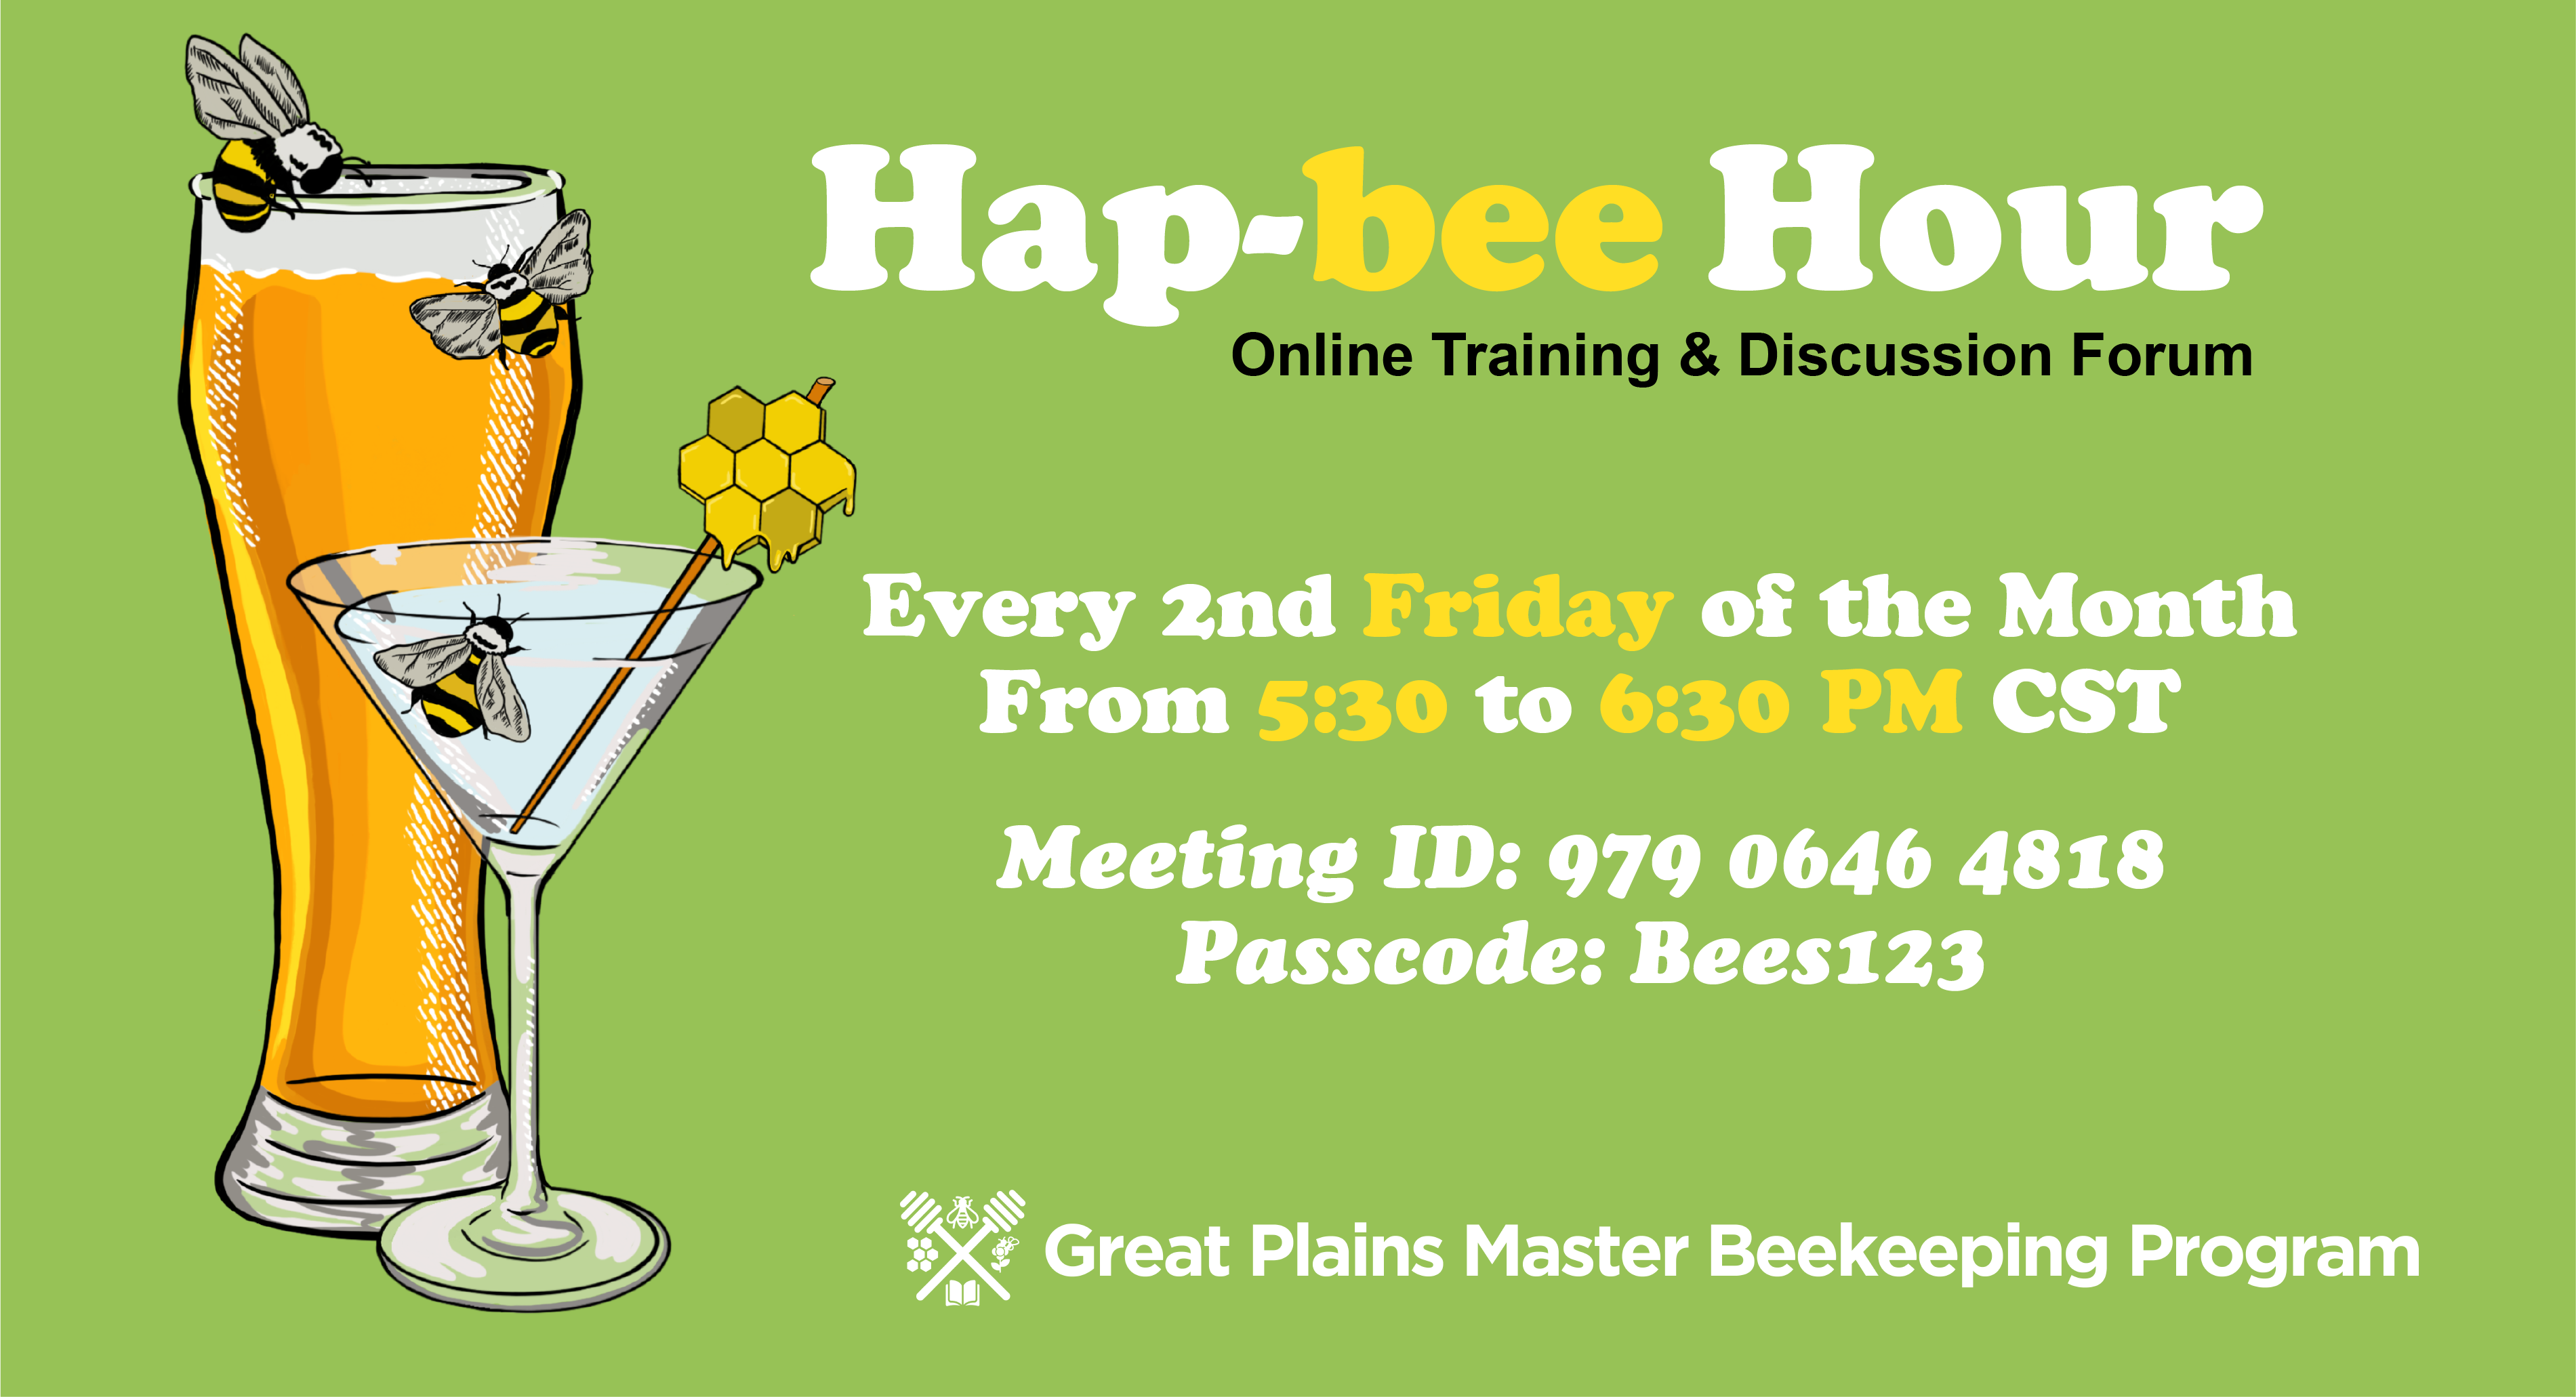 HapBee Hour Online Training & Discussion Form flyer. Every second Friday of the Month from 5:30 to 6:30 PM CST. Meeting ID: 979 0646 4818 Passcode: Bees123